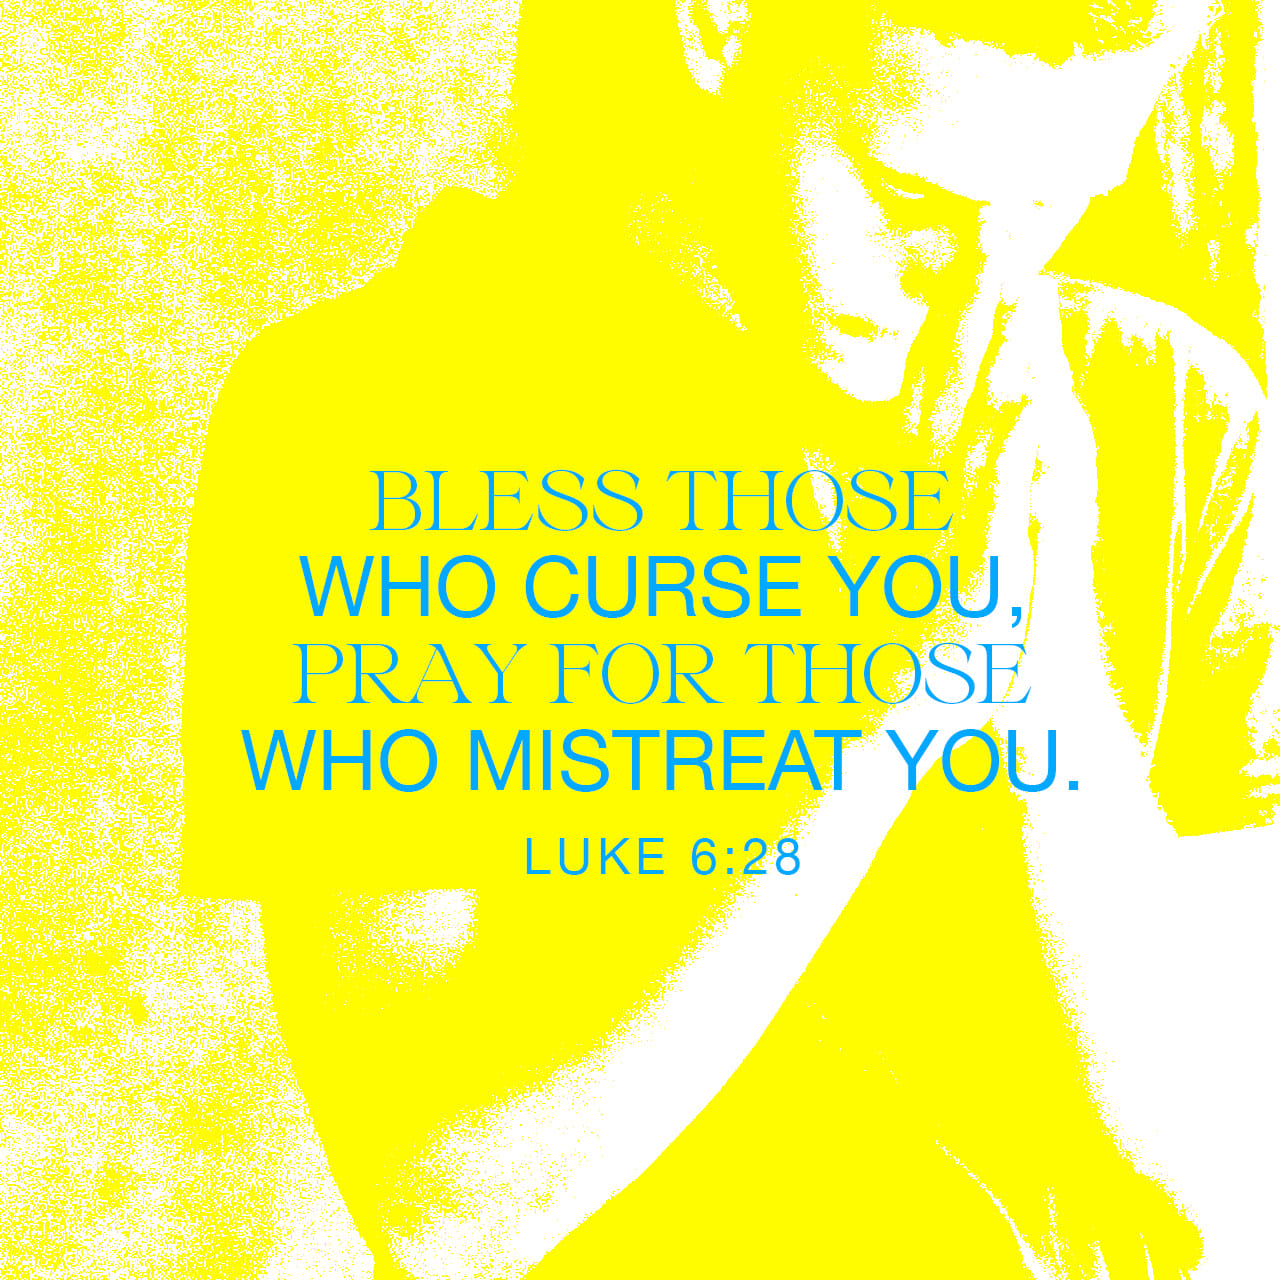 What does it mean to bless those who curse you (Luke 6:28)?